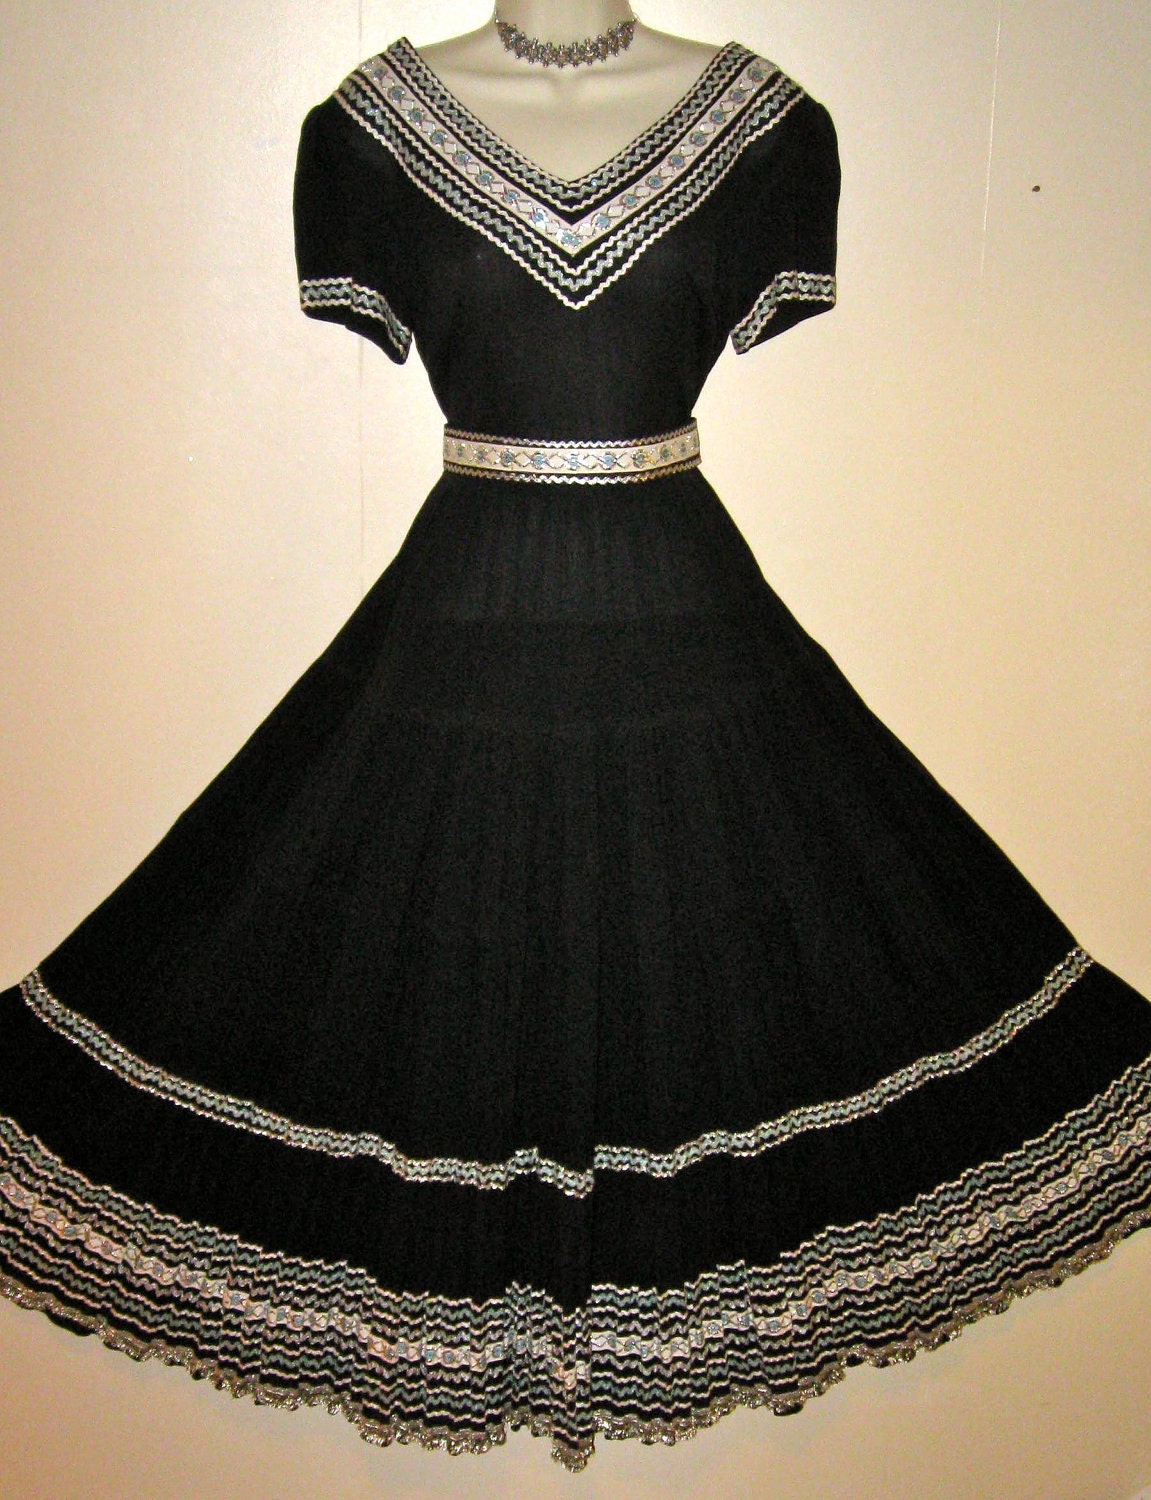 CUSTOM Southwest Dress, like the one Gramma Gracie and Aunt Agnes made back in the 50s